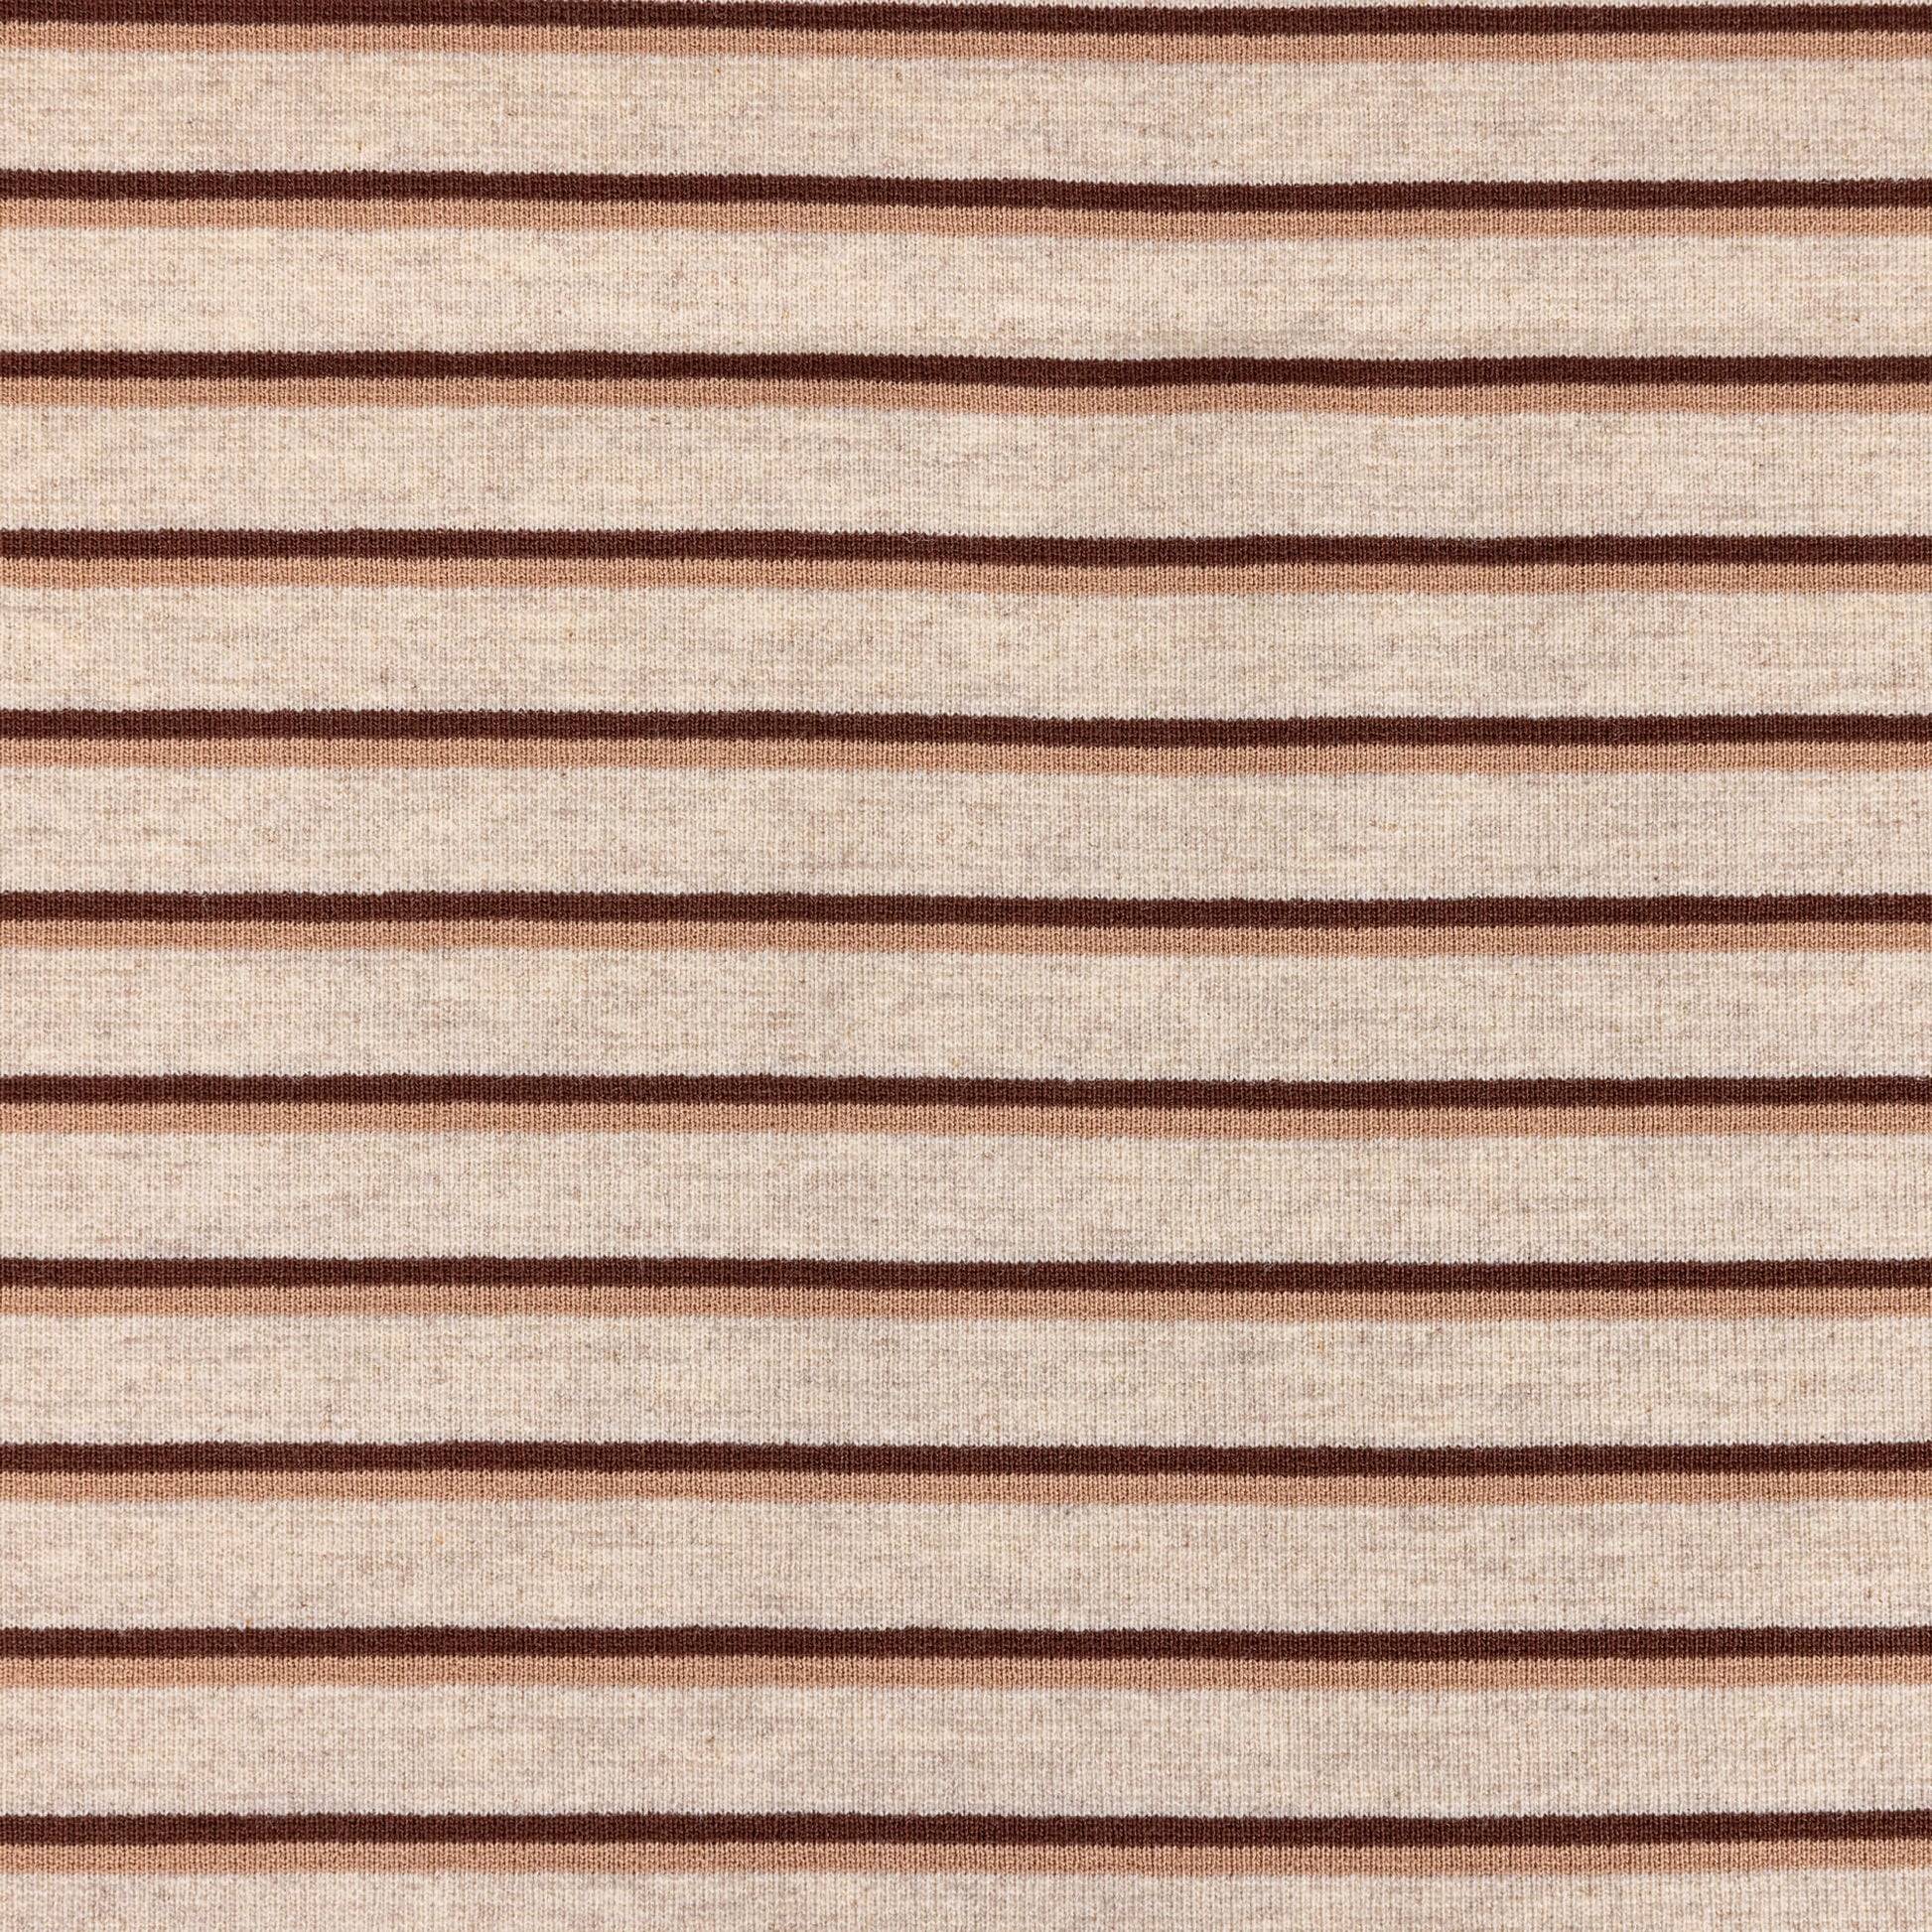 A horizontal view of Ecru, brown and beige striped soft t-shirt material in a jersey fabric for making clothing or crafting projects.